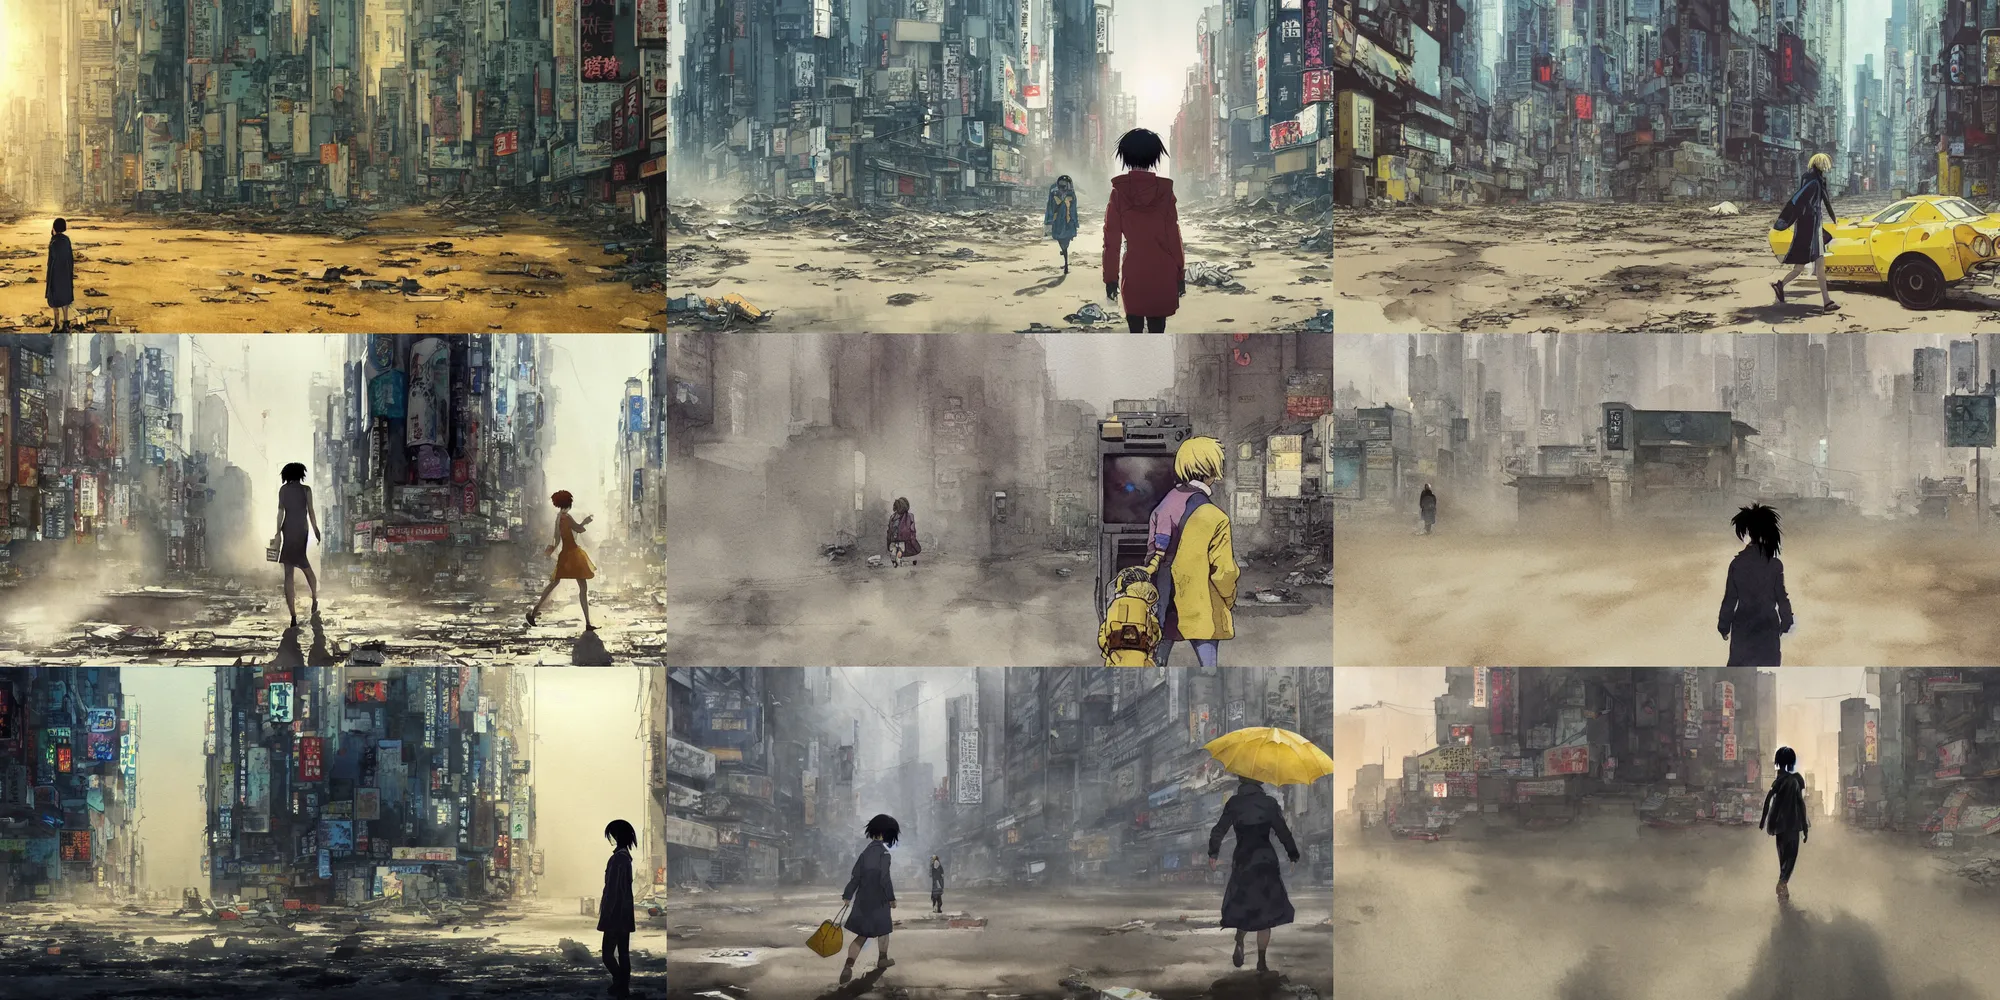 Prompt: incredible wide screenshot, ultrawide, simple watercolor, paper texture, katsuhiro otomo ghost in the shell movie scene, backlit distant shot of girl in a parka running from a monster robot side view ,yellow parasol in deserted dusty shinjuku junk town, broken vending machines, old pawn shop, bright sun bleached ground, mud, fog, dust, windy, scary chameleon face muscle robot monster lurks in the background, ghost mask, teeth, animatronic, black smoke, pale beige sky, junk tv, texture, shell, brown mud, dust, bored expression, overhead wires, telephone pole, dusty, dry, pencil marks, genius party,shinjuku, koju morimoto, katsuya terada, masamune shirow, tatsuyuki tanaka hd, 4k, remaster, dynamic camera angle, deep 3 point perspective, fish eye, dynamic scene